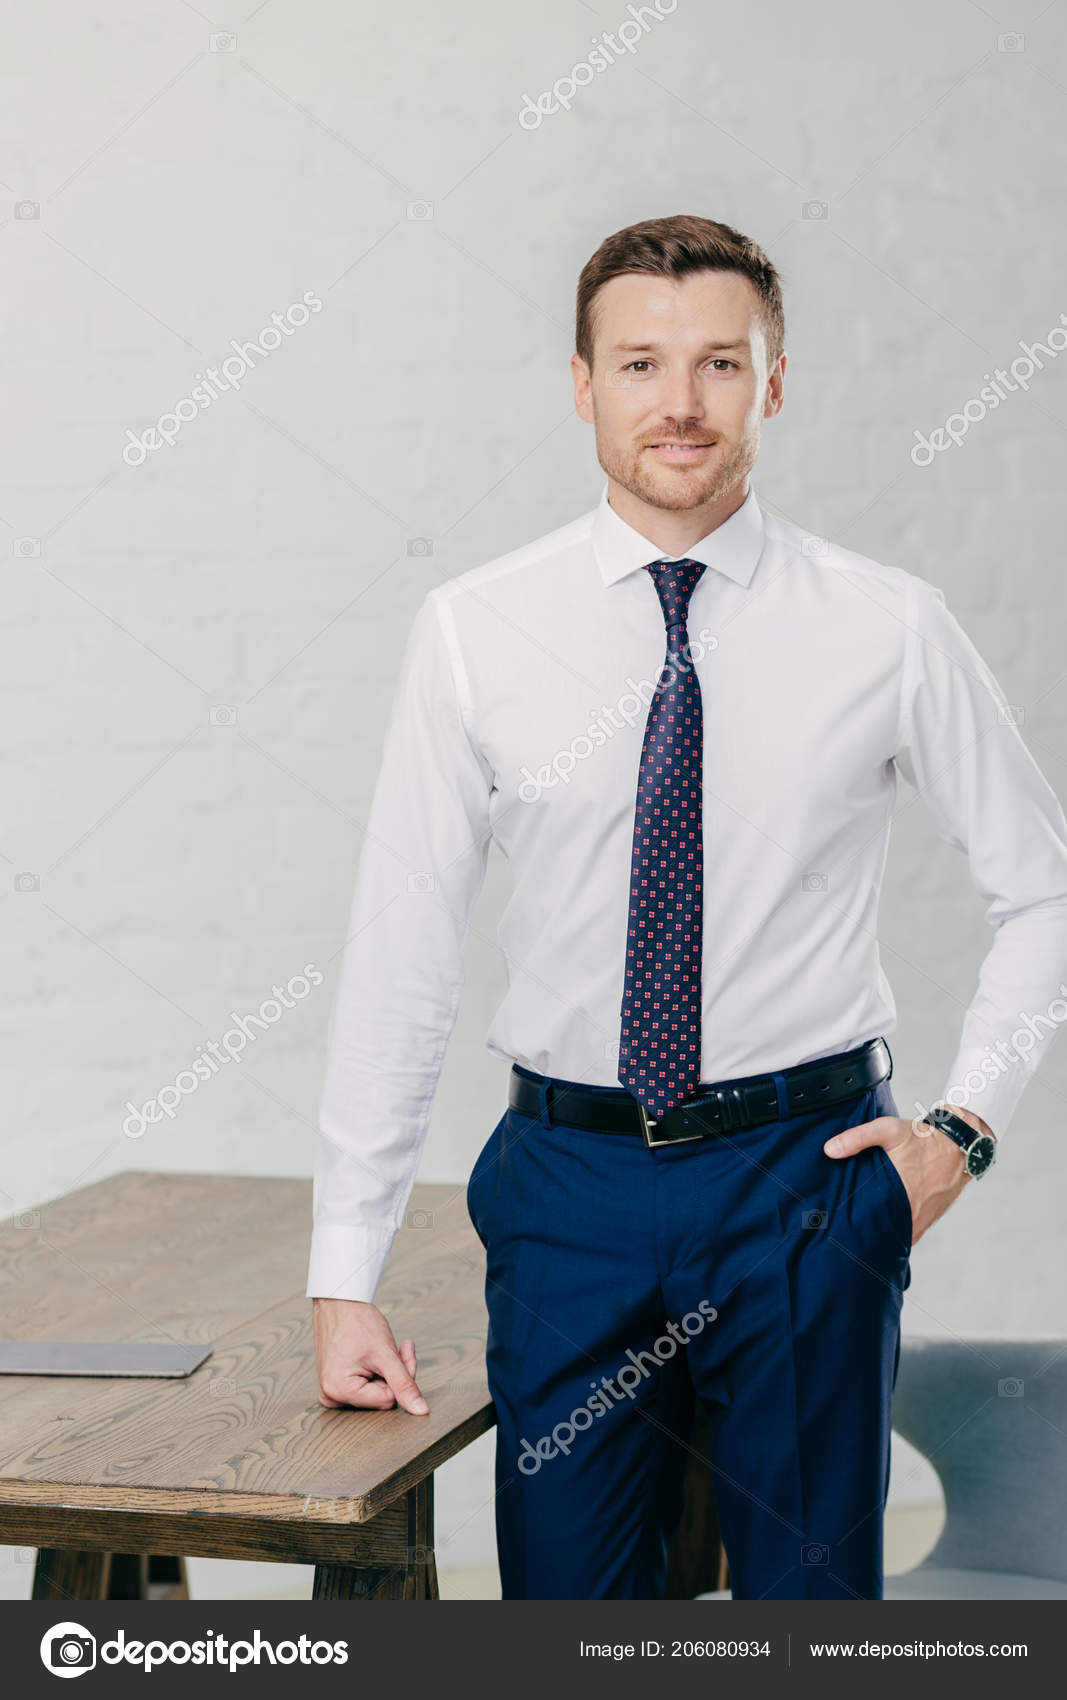 depositphotos 206080934 stock photo photo handsome male office worker